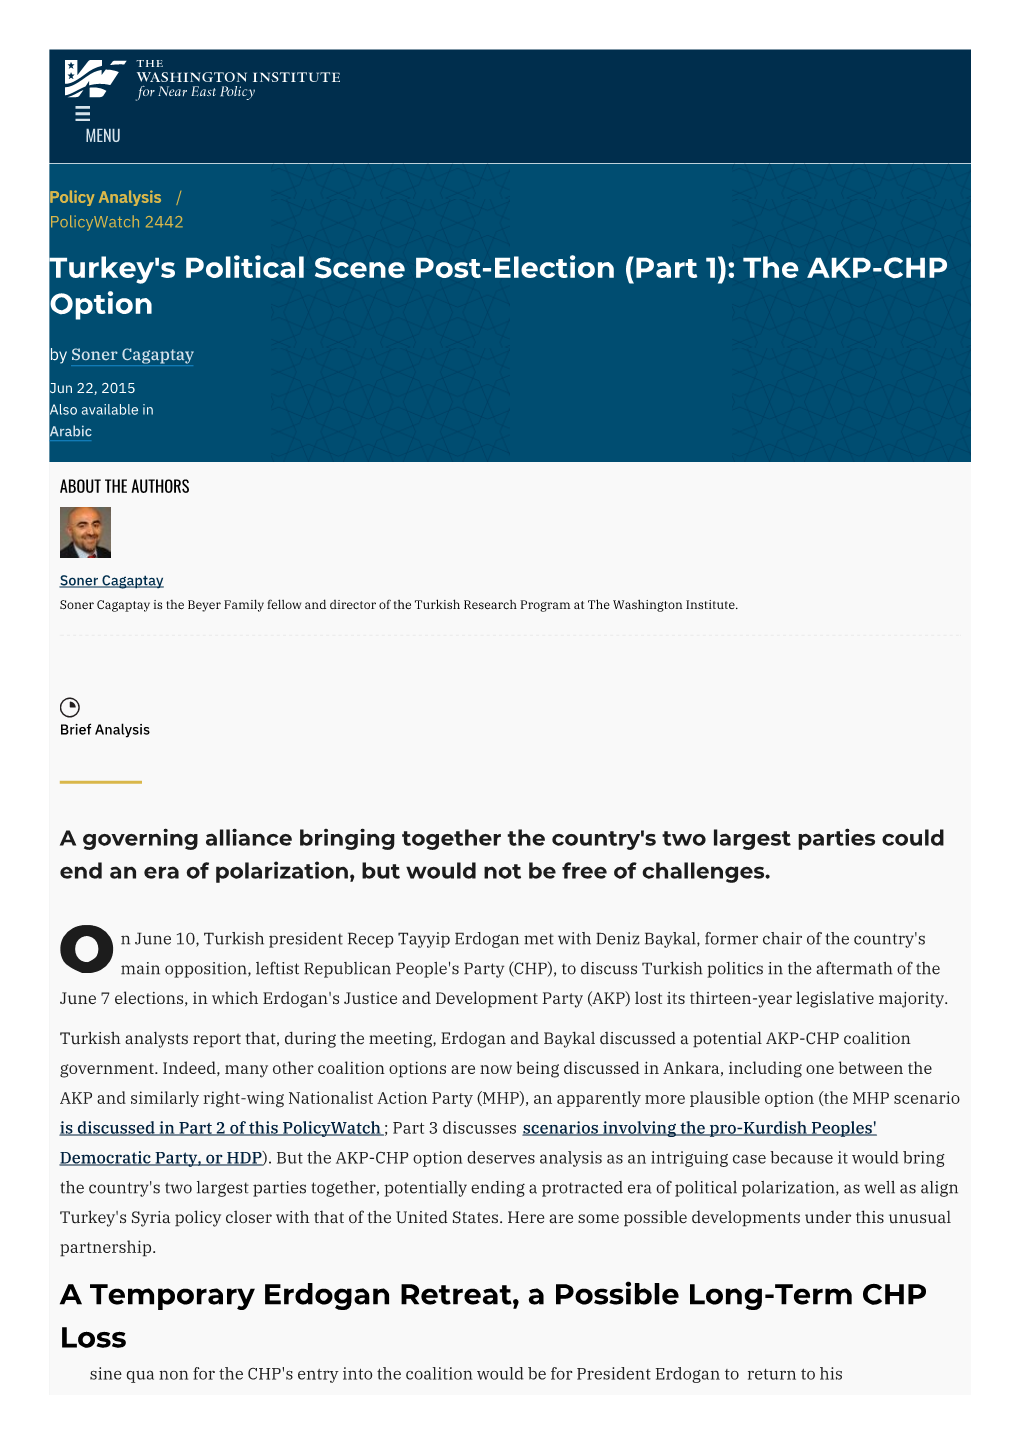 Turkey's Political Scene Post-Election (Part 1): the AKP-CHP Option by Soner Cagaptay